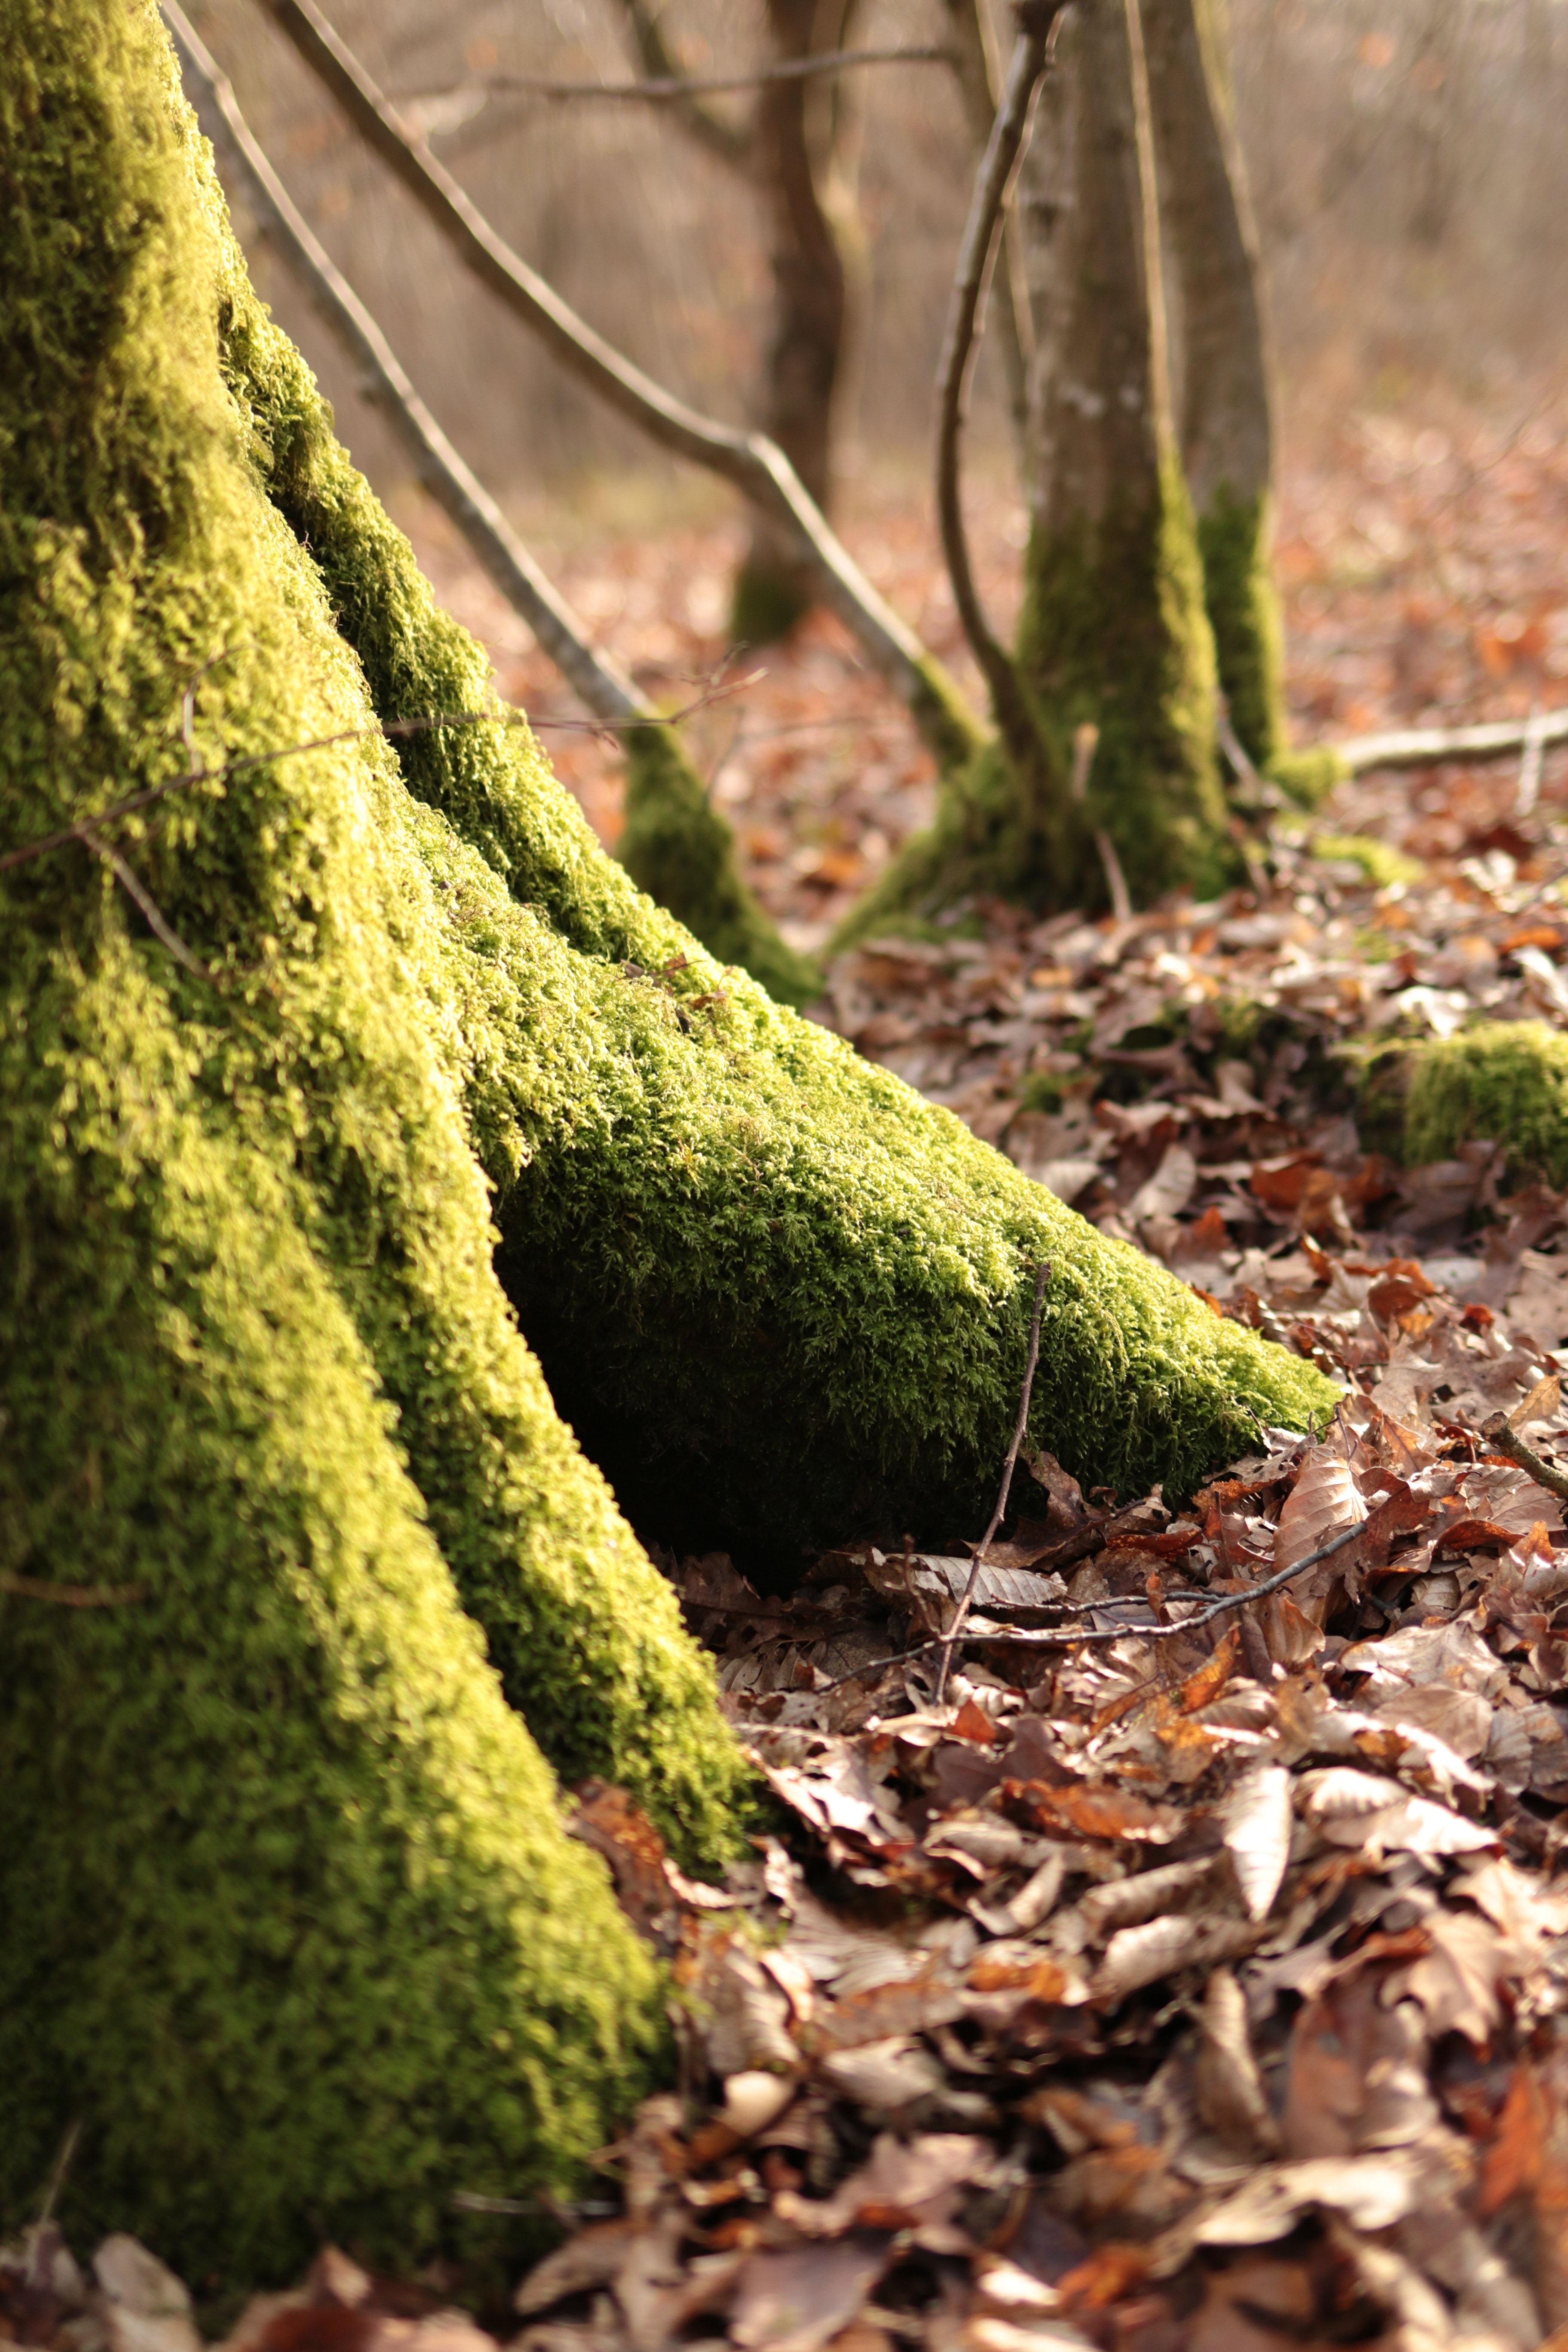 green moss on brown tree trunk near withered leaves